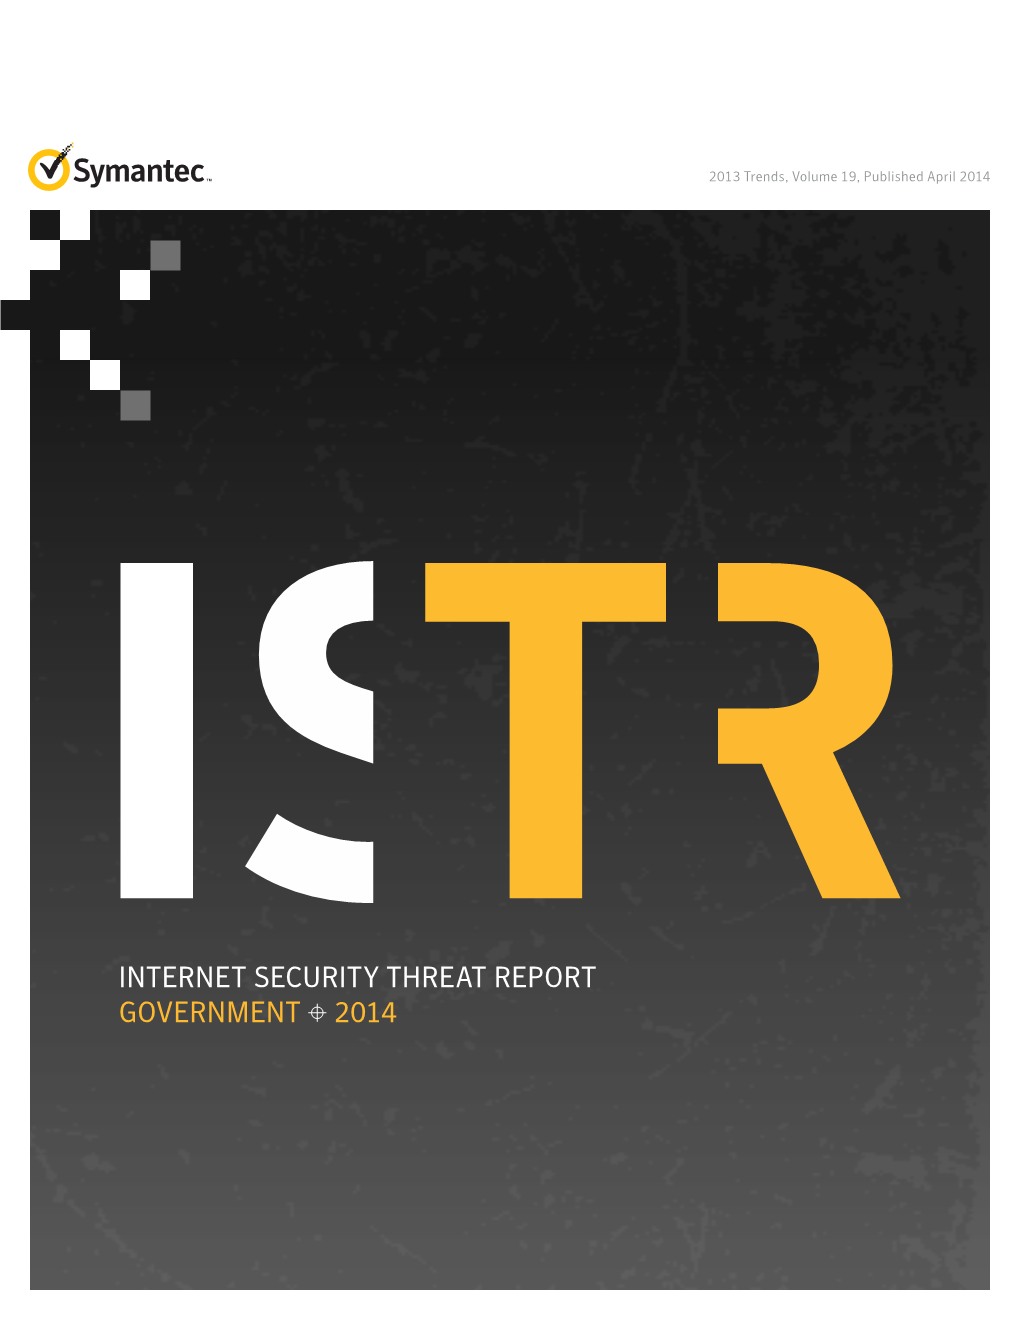 INTERNET SECURITY THREAT REPORT GOVERNMENT 2014 P